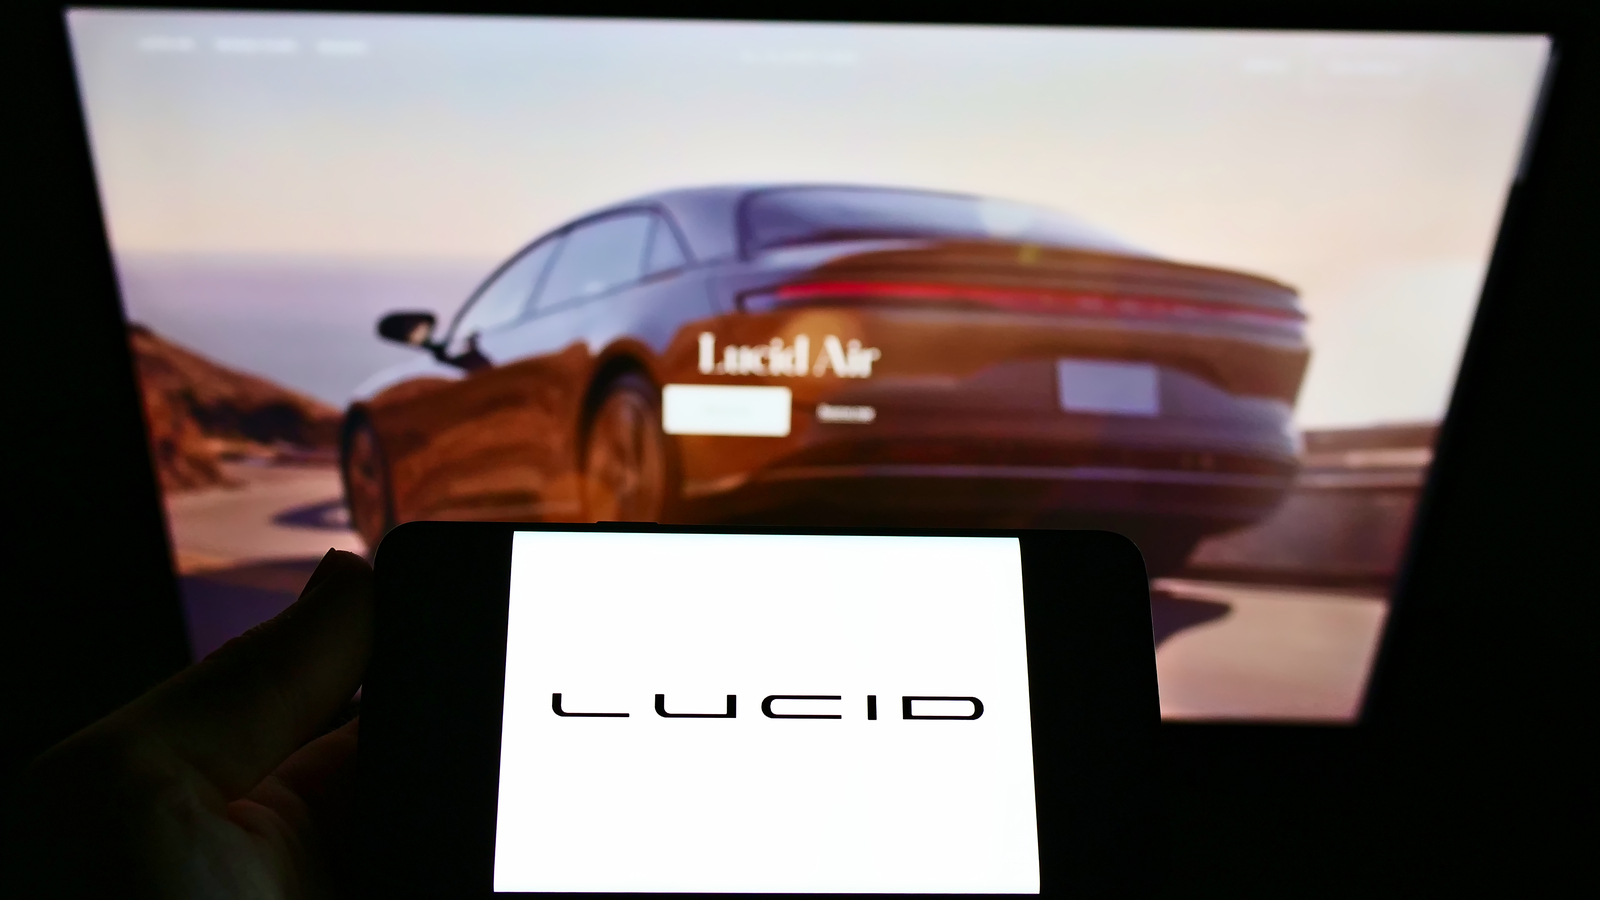 Someone is viewing a red Lucid Air car on a computer screen while holding a phone that says Lucid